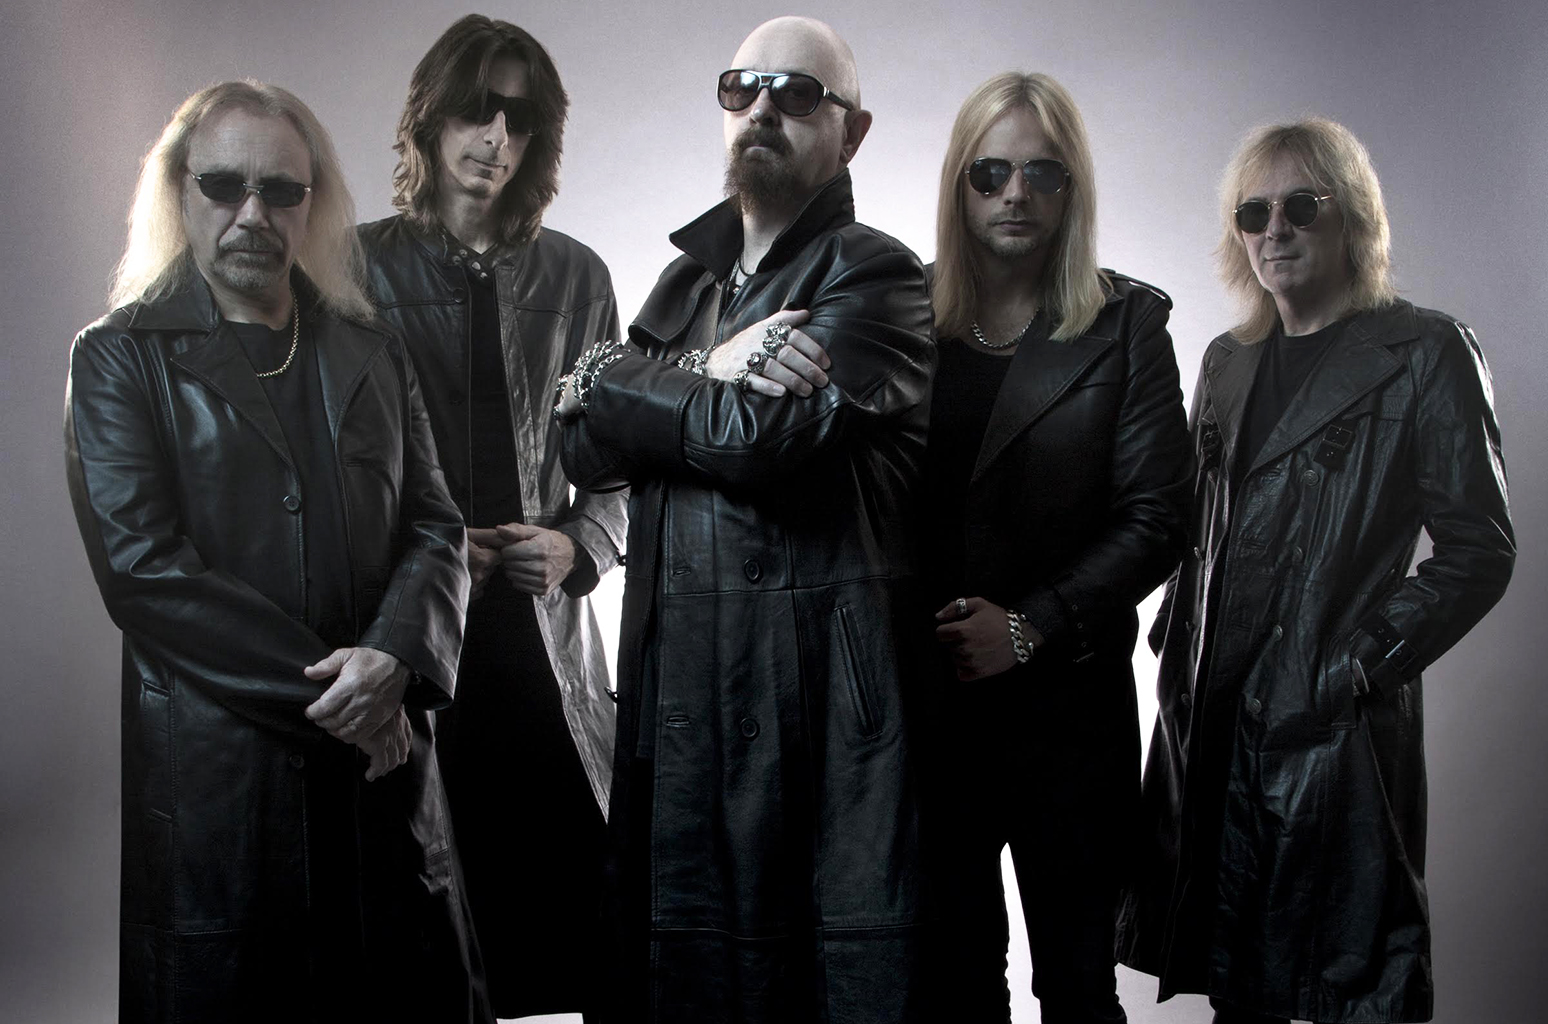 JUDAS PRIEST Frontman Rob Halford Reveals Young Metal Bands He's a Fan Of » Metal Wani1548 x 1024